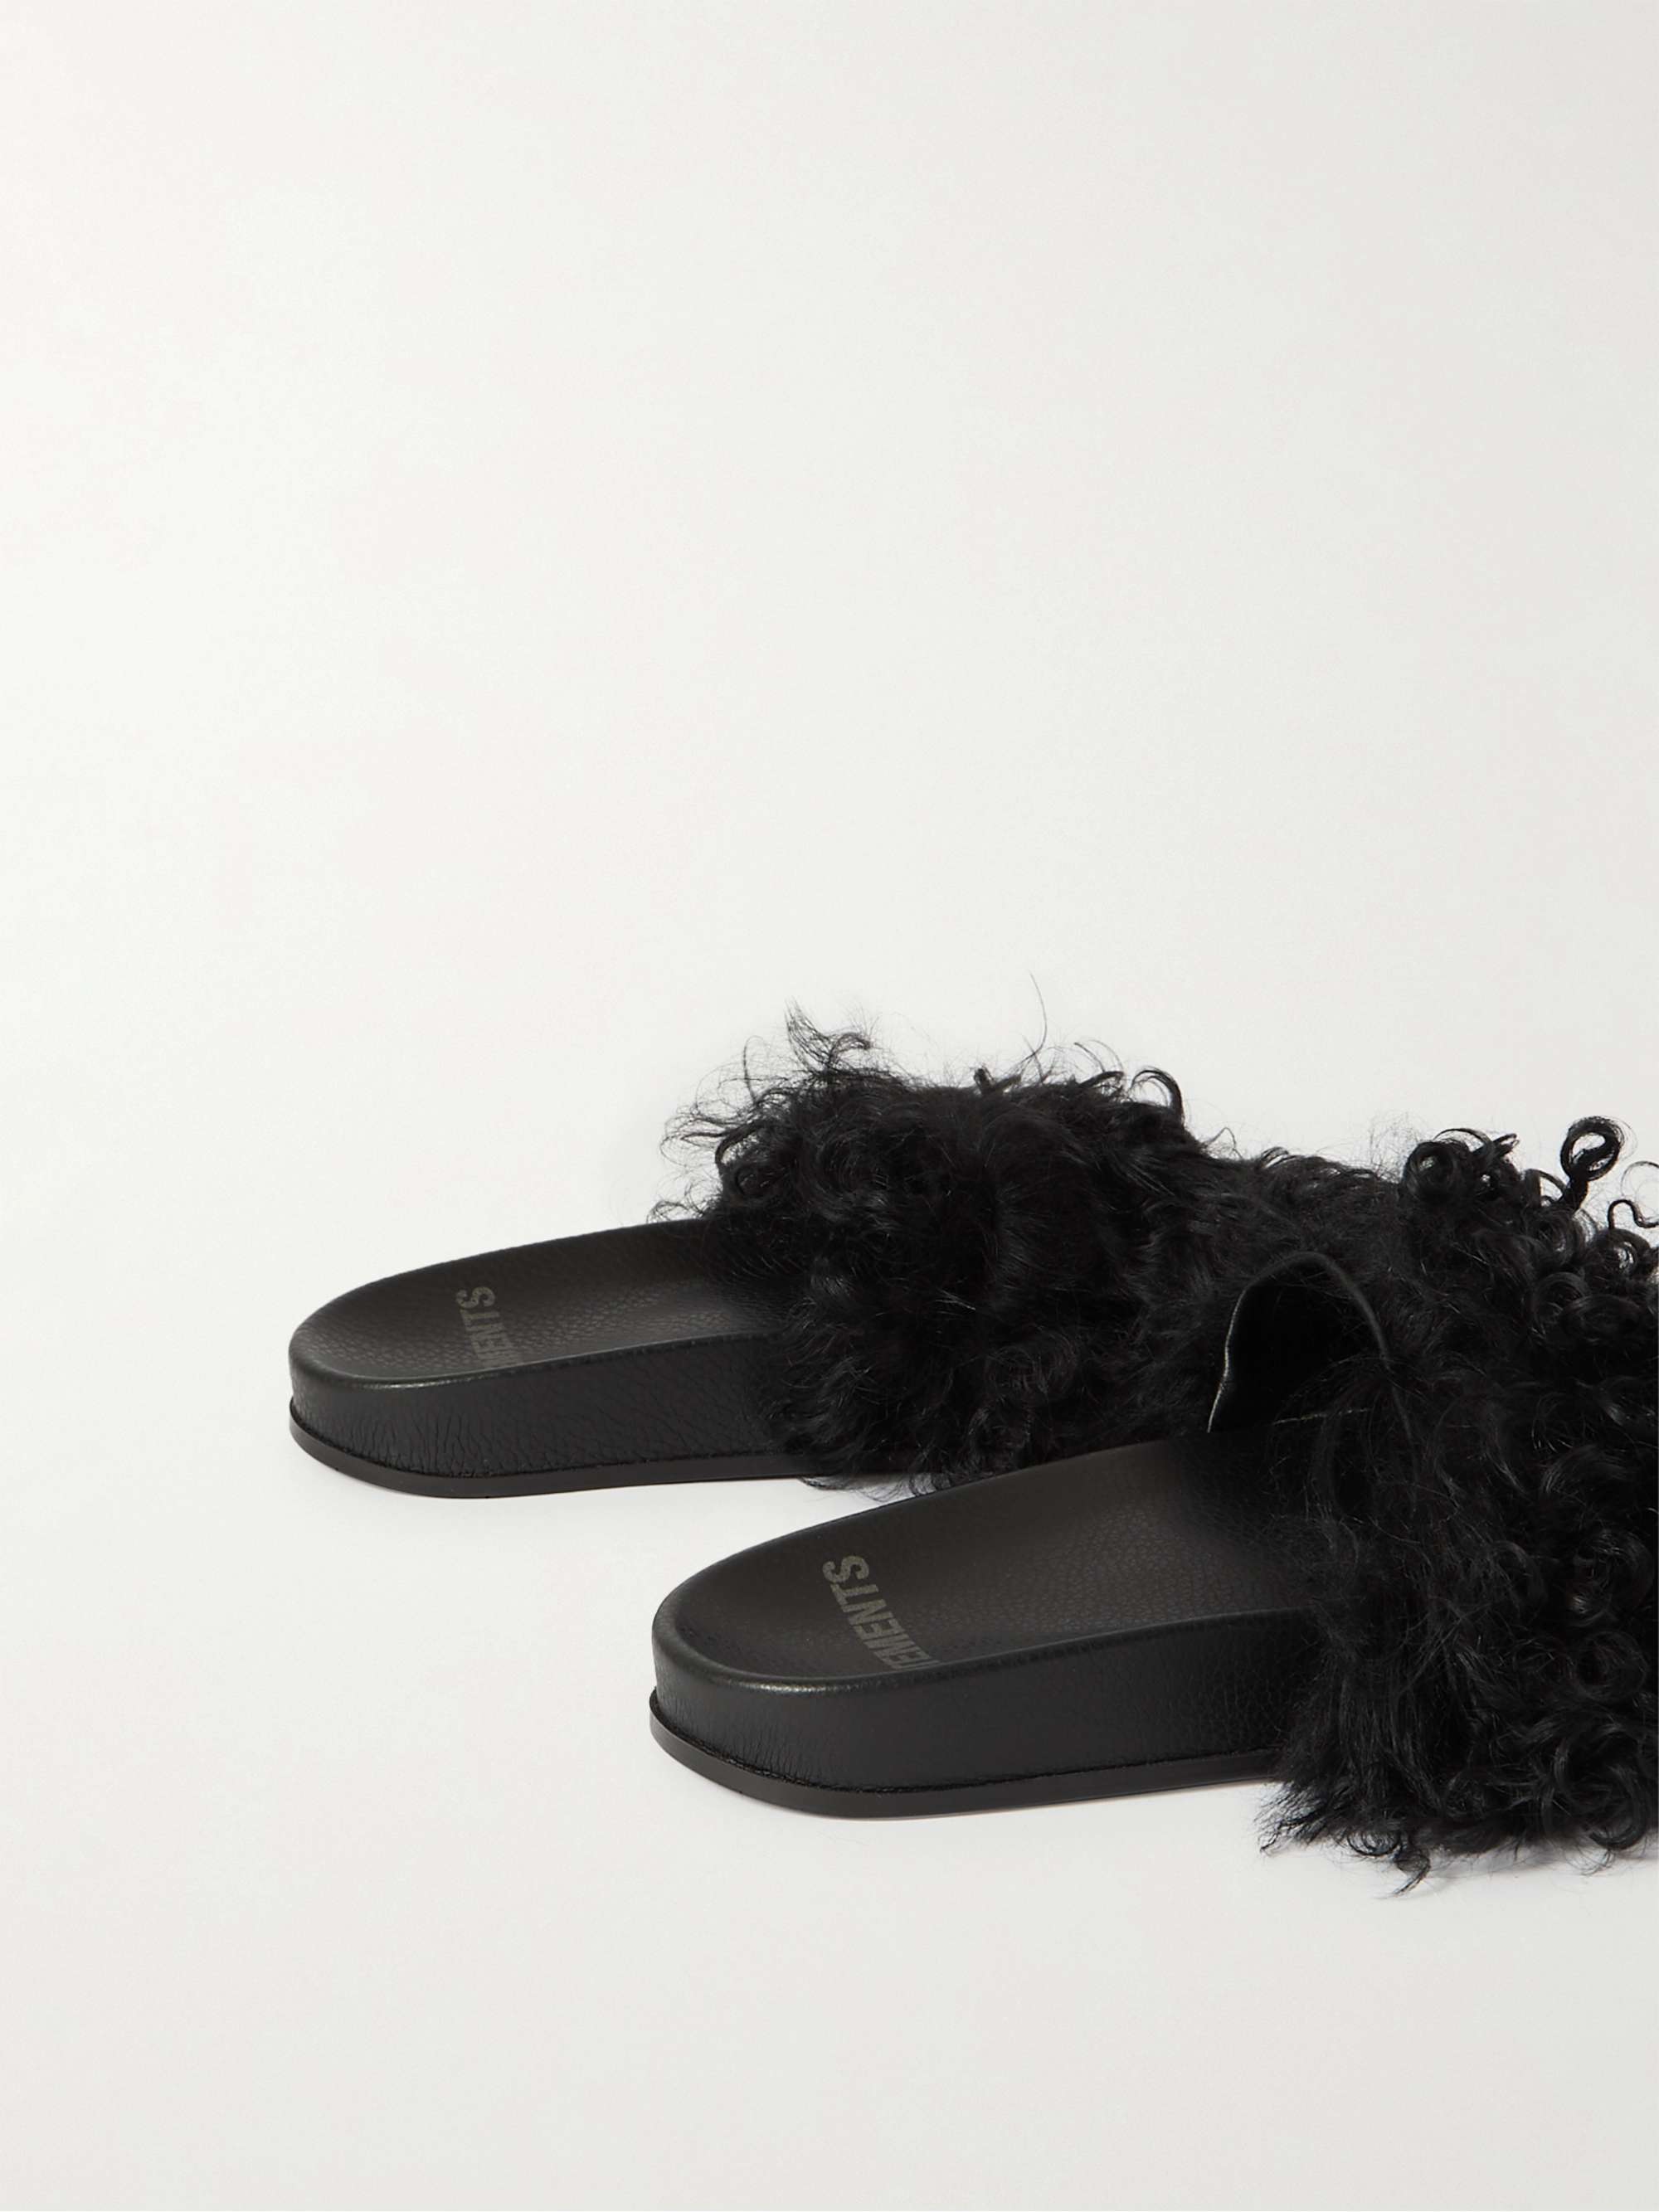 VETEMENTS Shearling and Rubber Slides